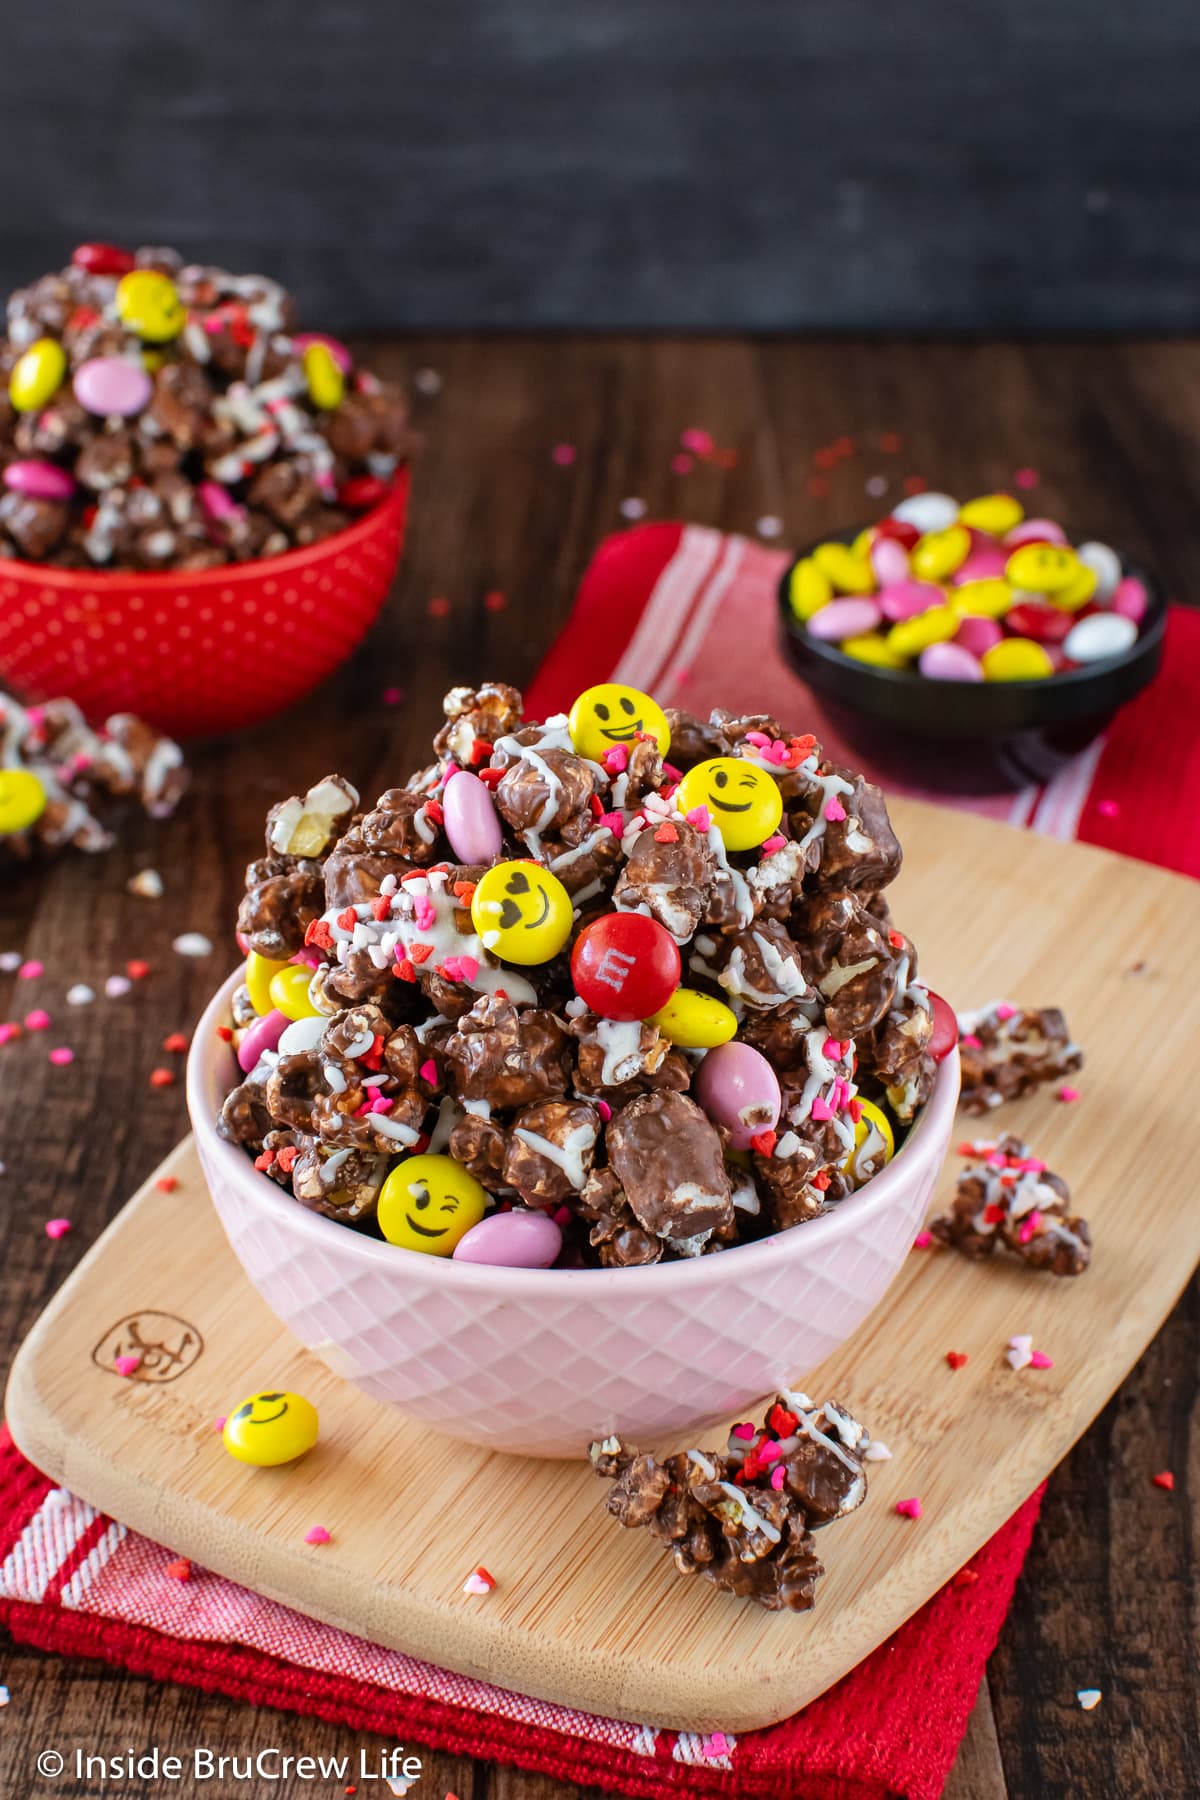 A pink bowl of chocolate popcorn and candy.